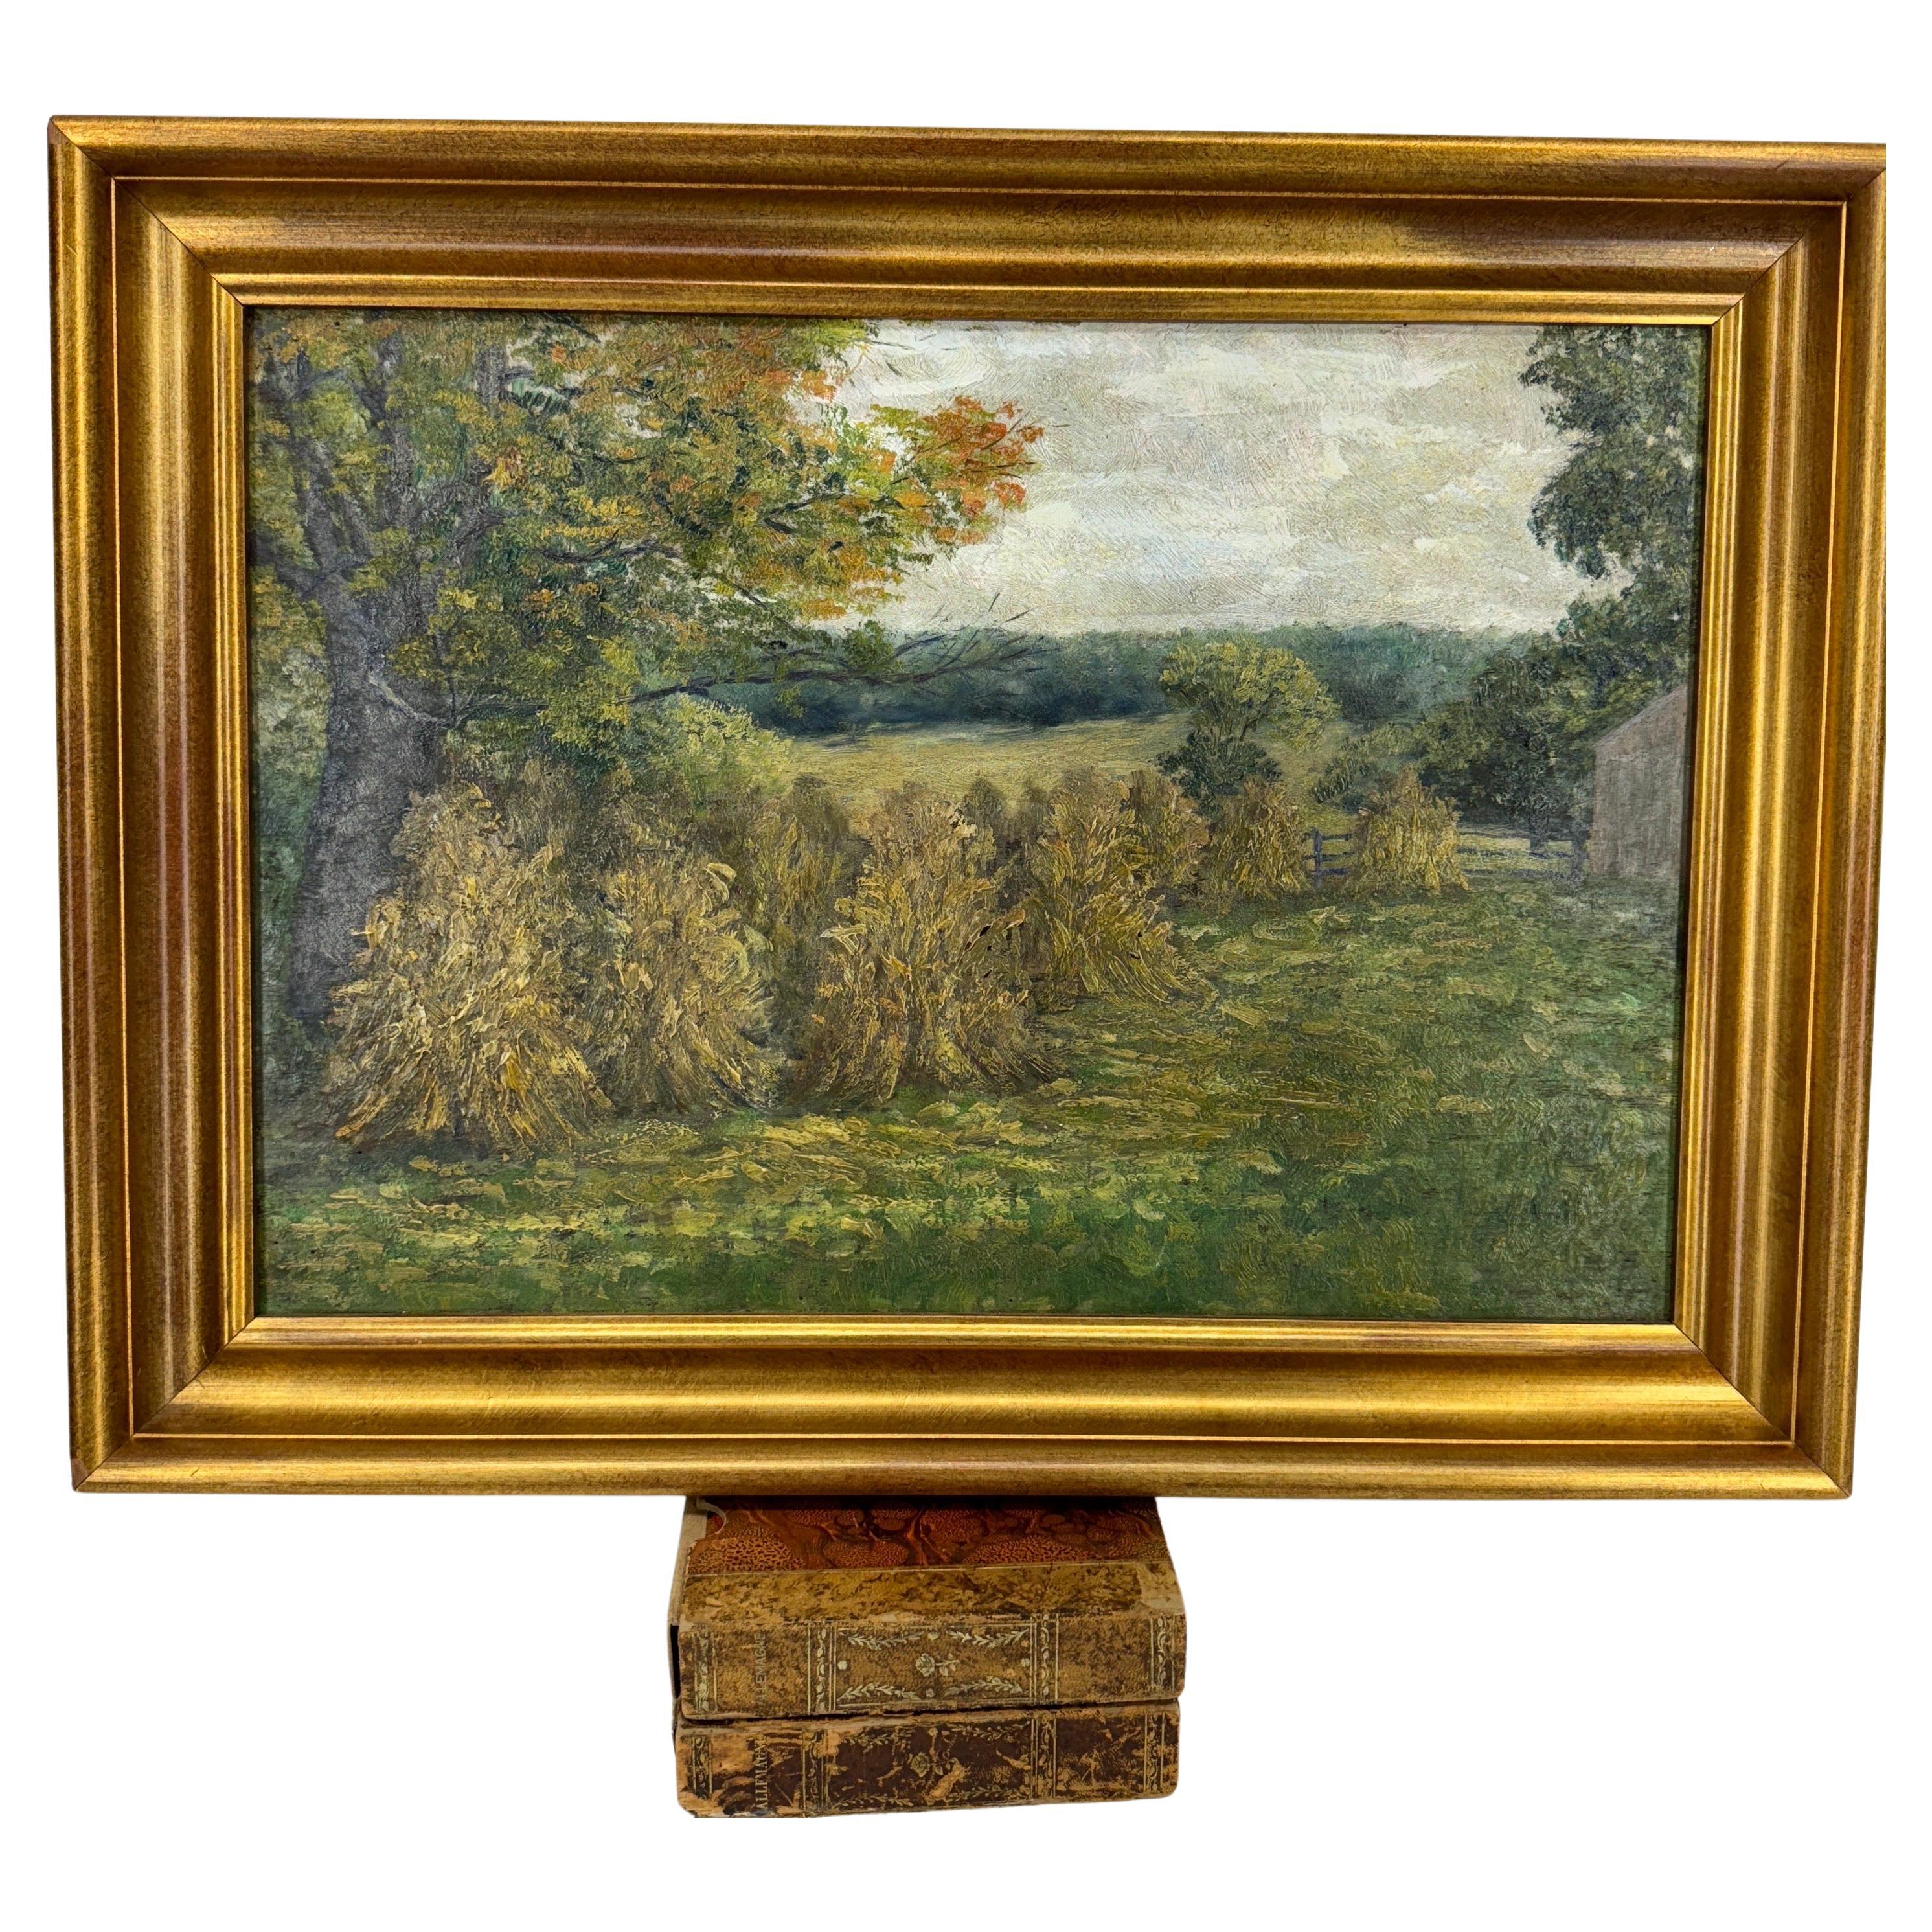 Romantic French Haystack Field Landscape Oil Painting Framed, Early 20th Century For Sale